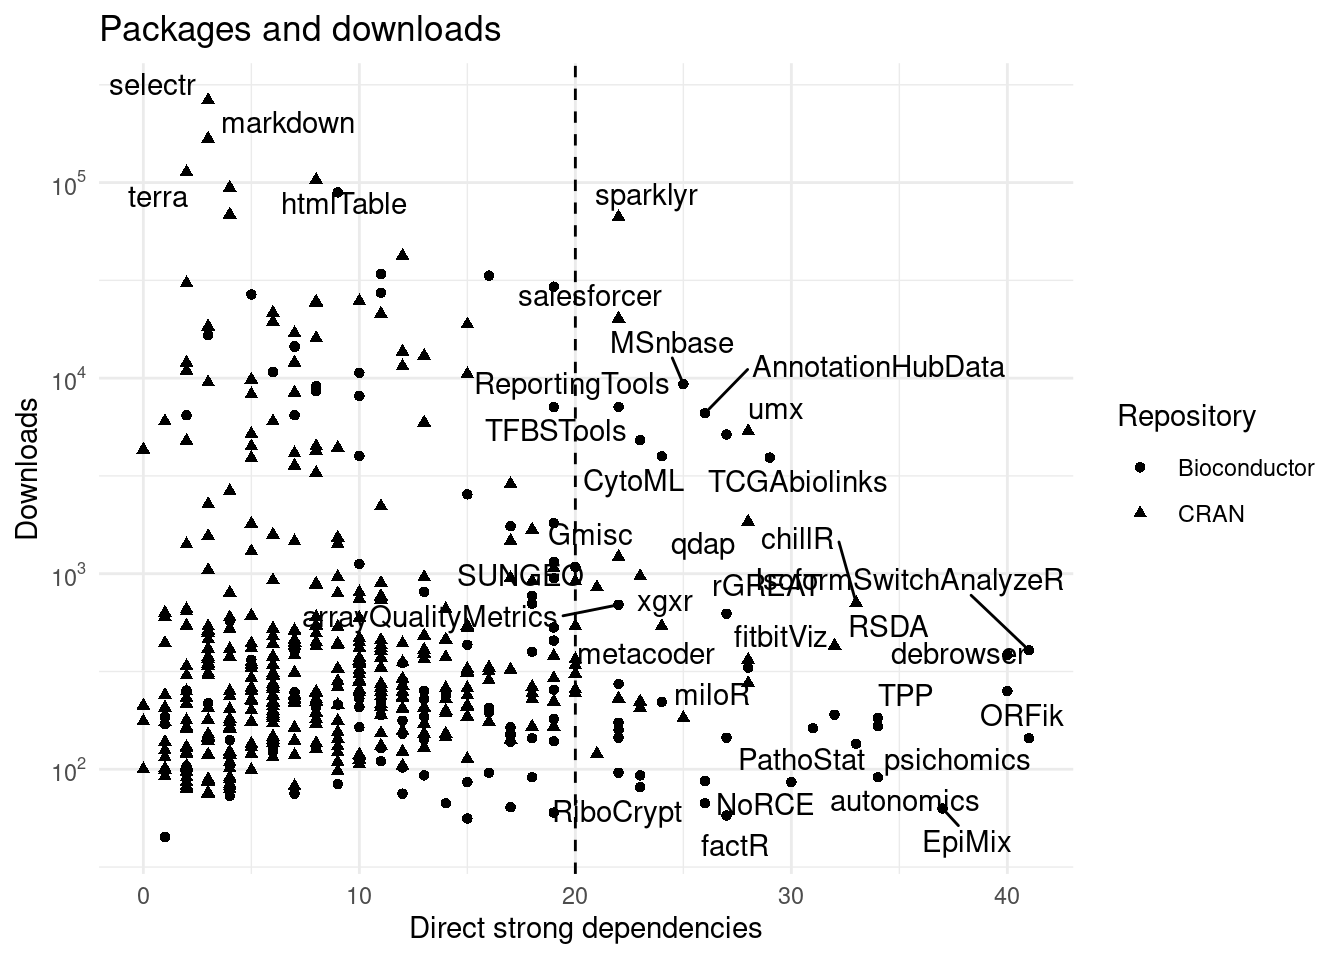 Direct strong dependencies vs downloads. Many pakcages have more than 20 direct imports.